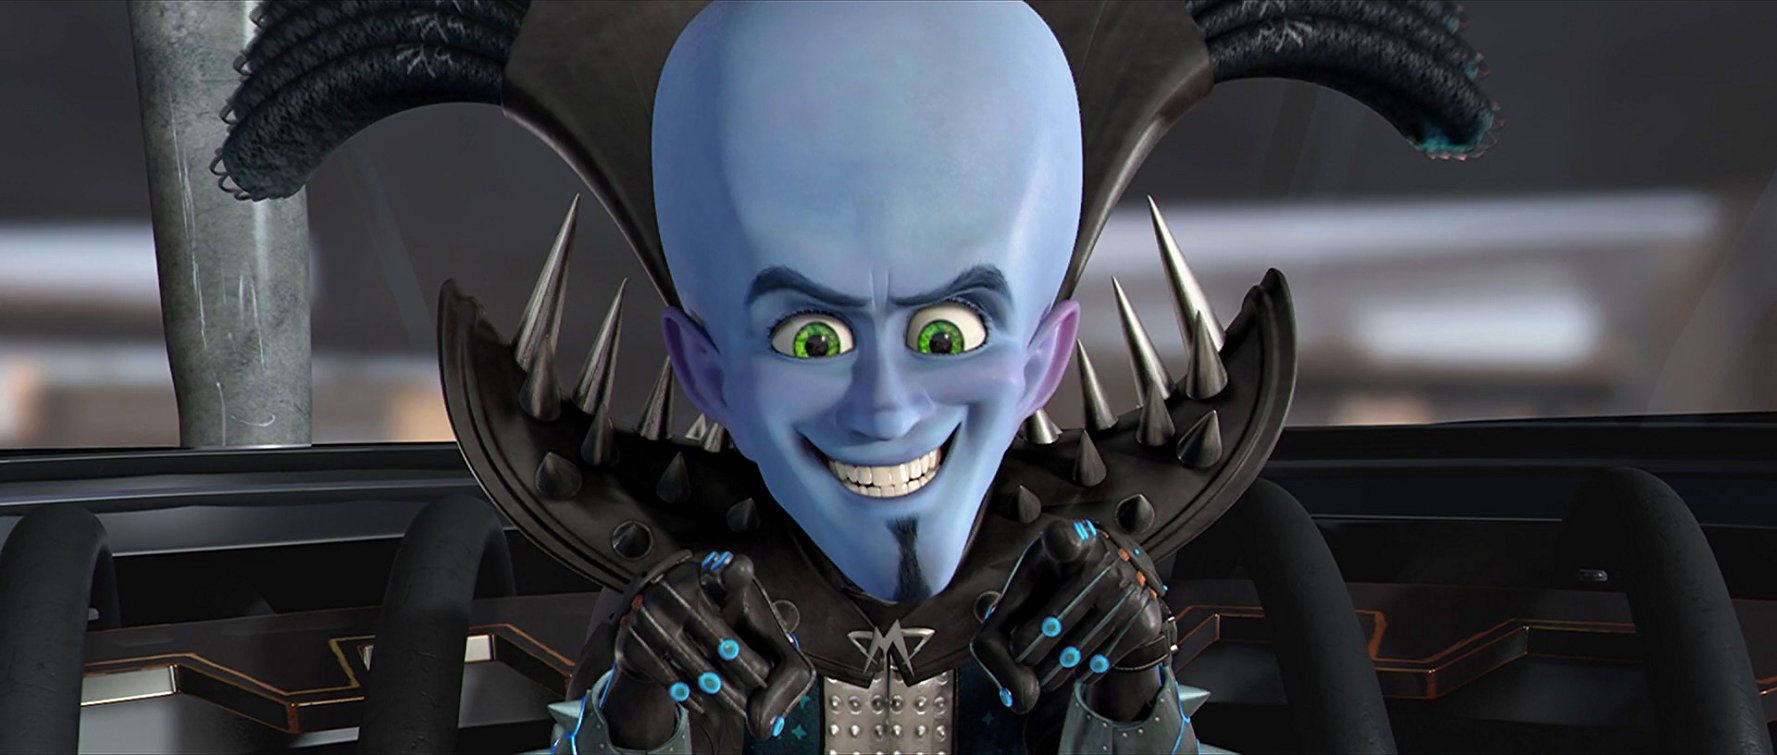 8 Movies Like Megamind You Must See